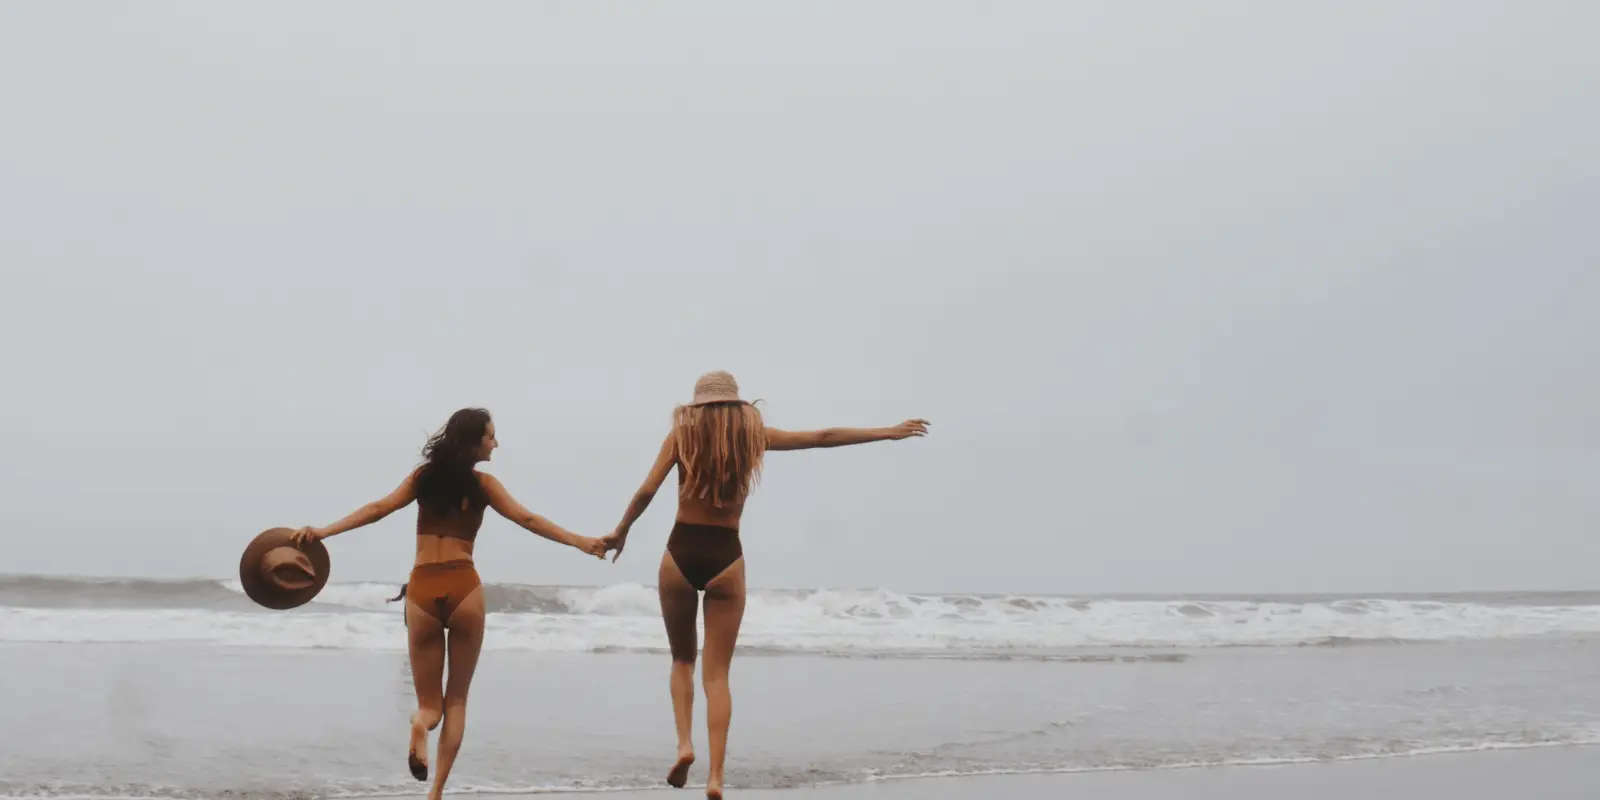 Two women in bikinis, holding hands, run towards the ocean on a cloudy day. One holds a hat, the other wears one. Waves crash gently in the background, creating a carefree and joyful beach scene perfect for a Shop Surf + Sand moment.